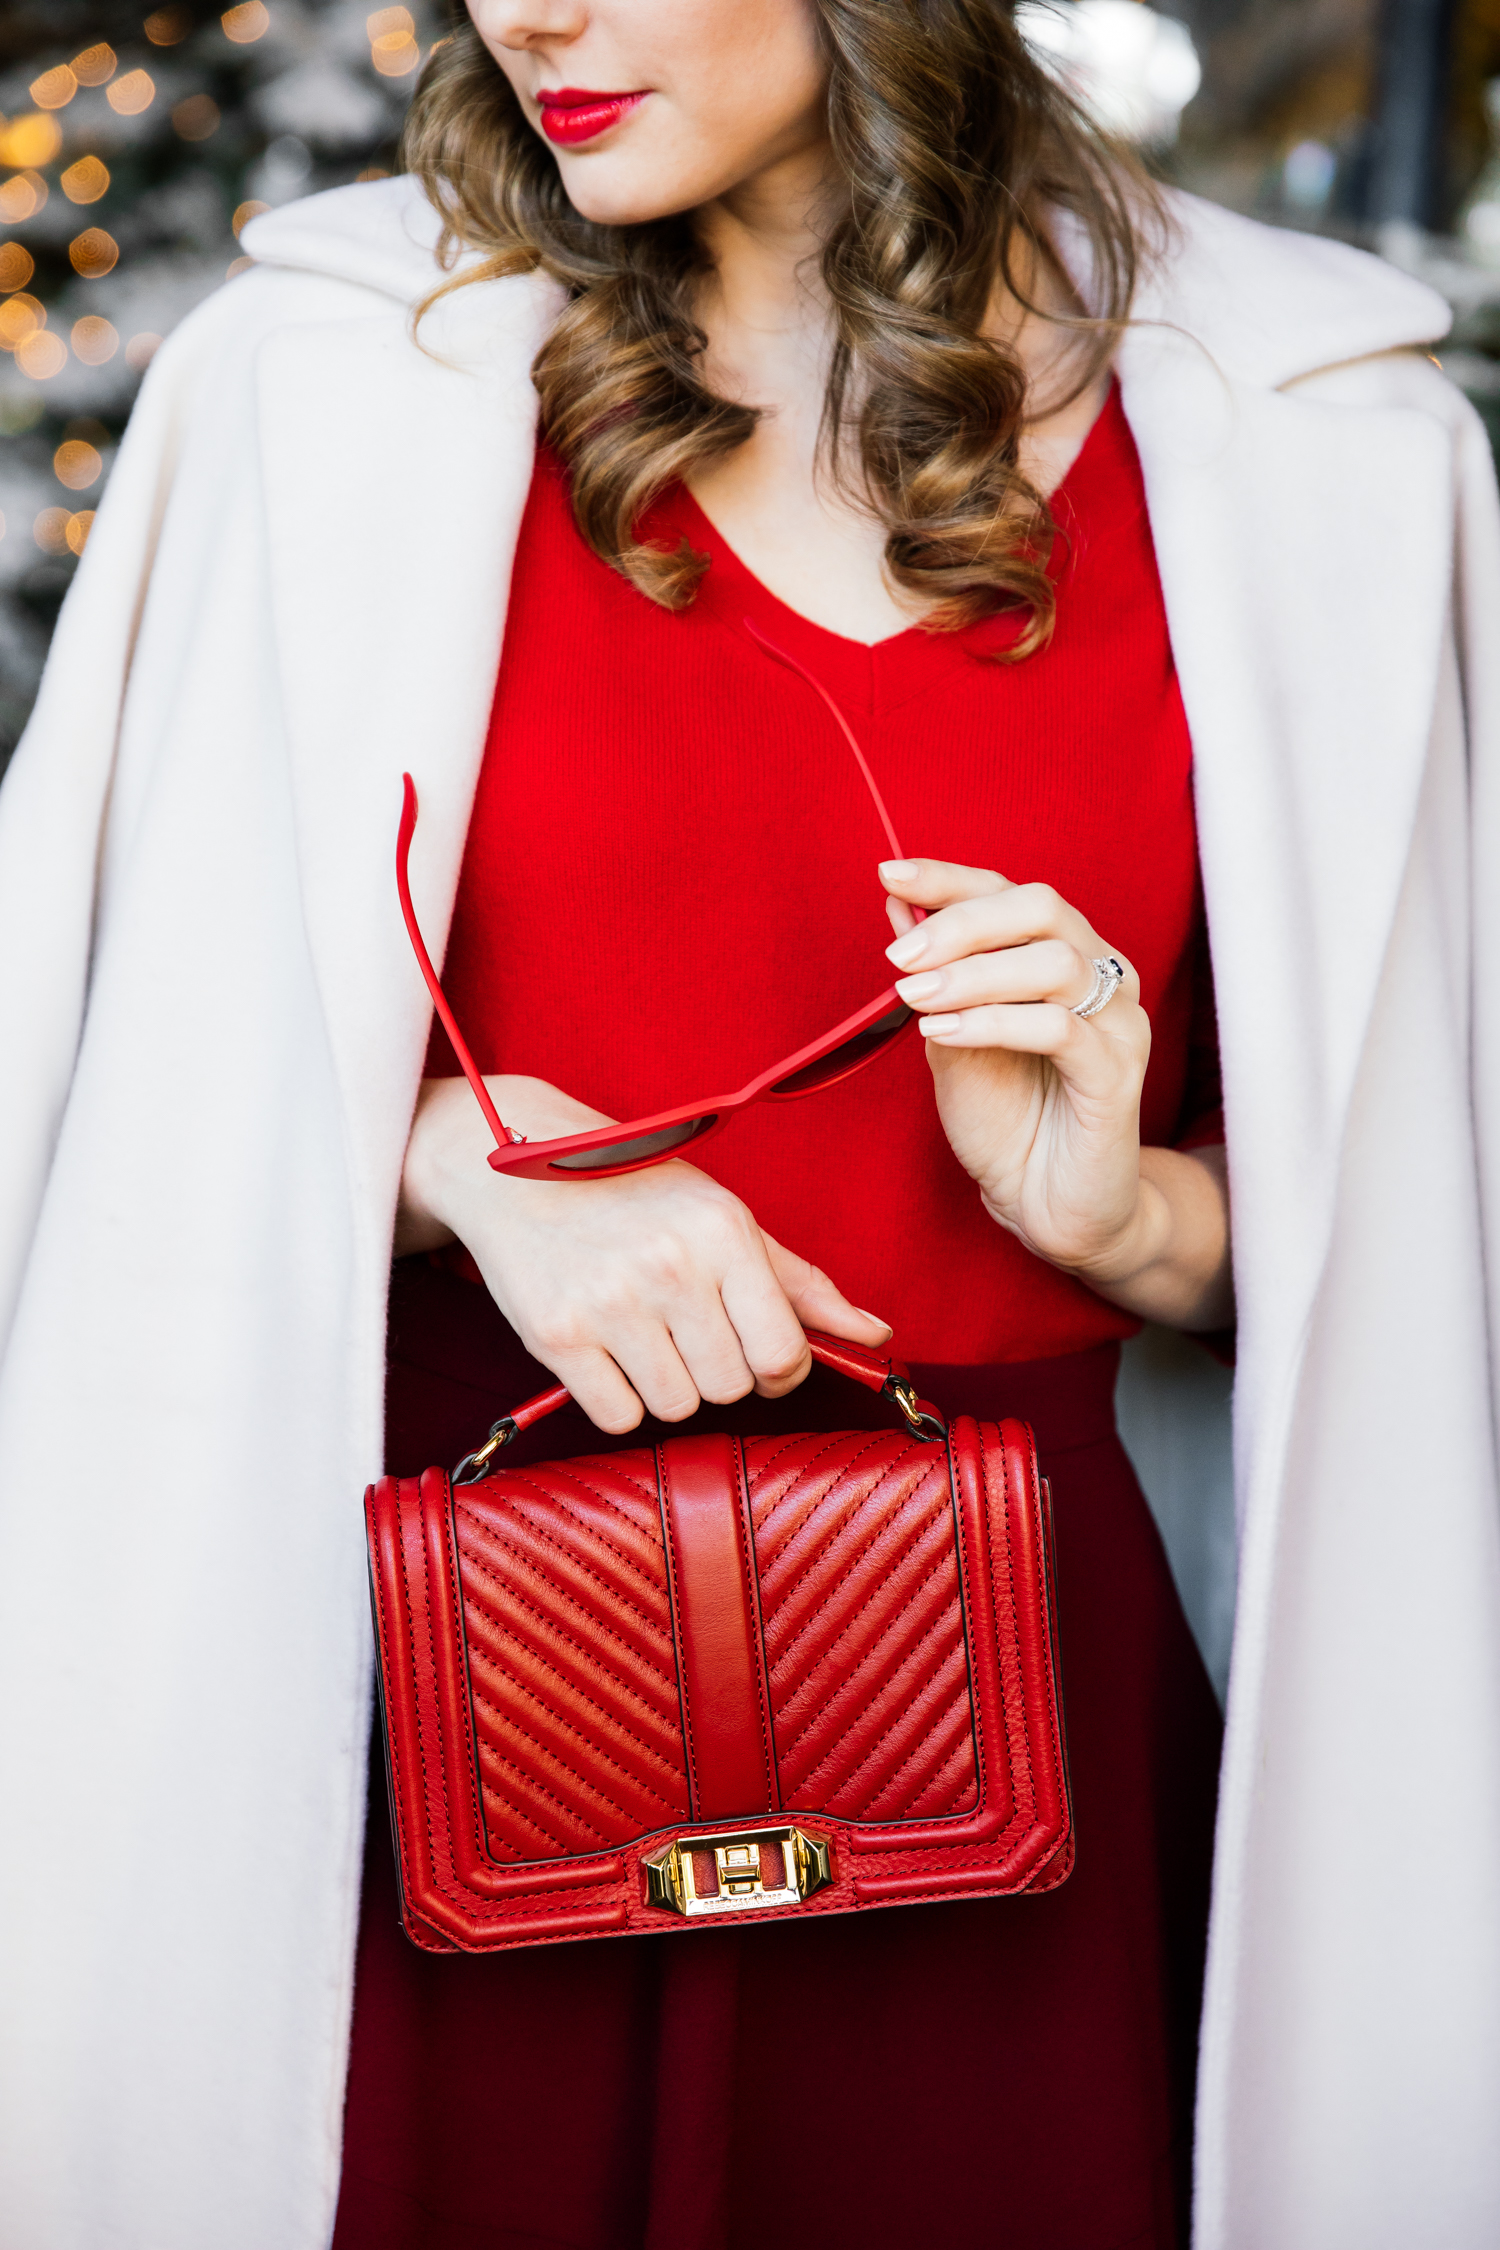 Alyssa Campanella of The A List blog shares her last minute holiday look wearing Talbots cashmere v-neck sweater, Club Monaco Leala red skirt, and a red Topshop beret